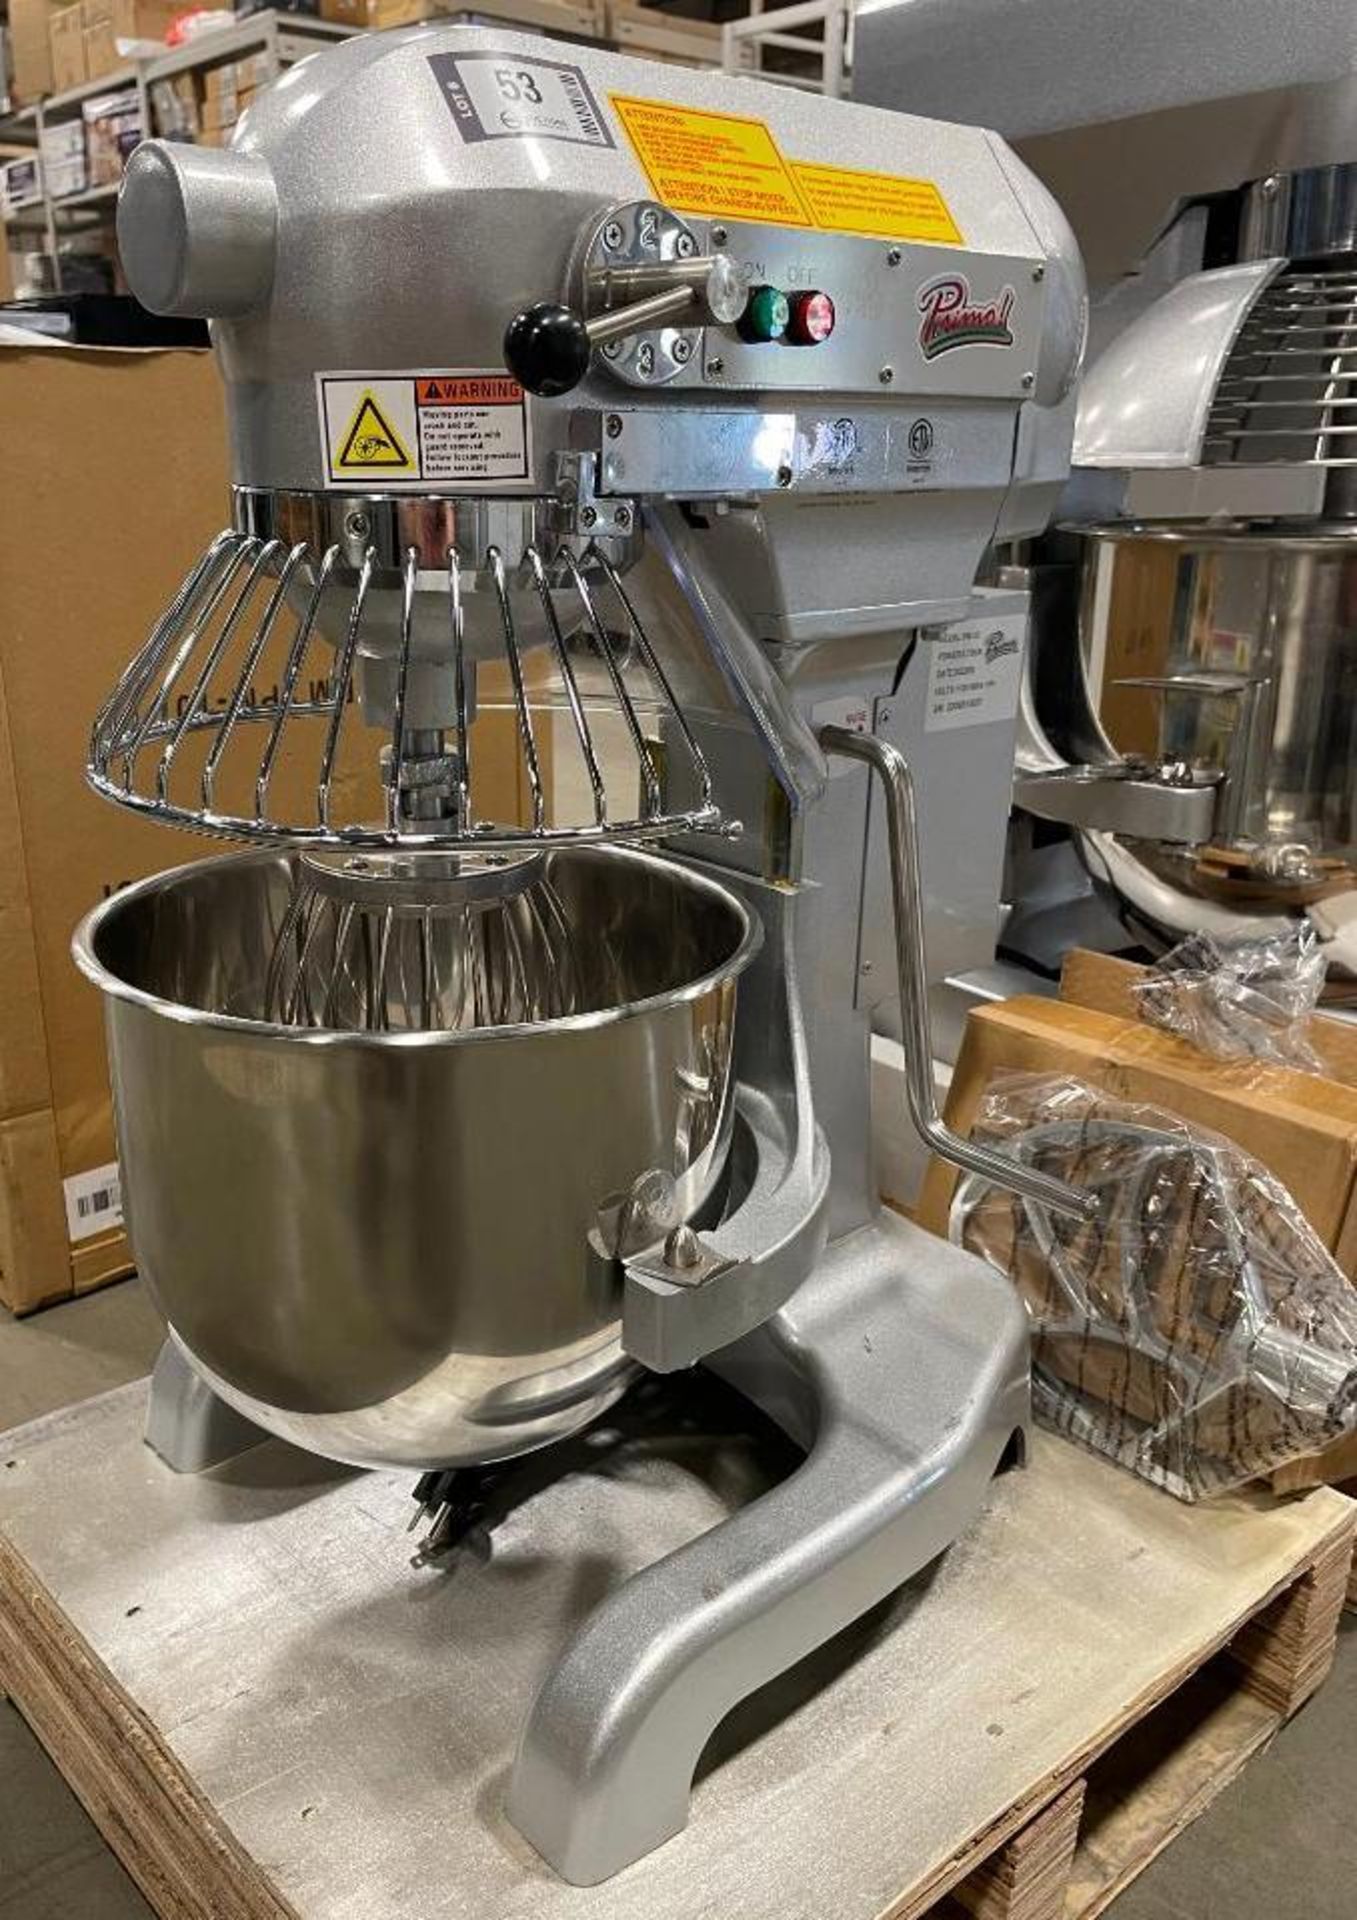 NEW PRIMO 10 QT COMMERCIAL STAND MIXER